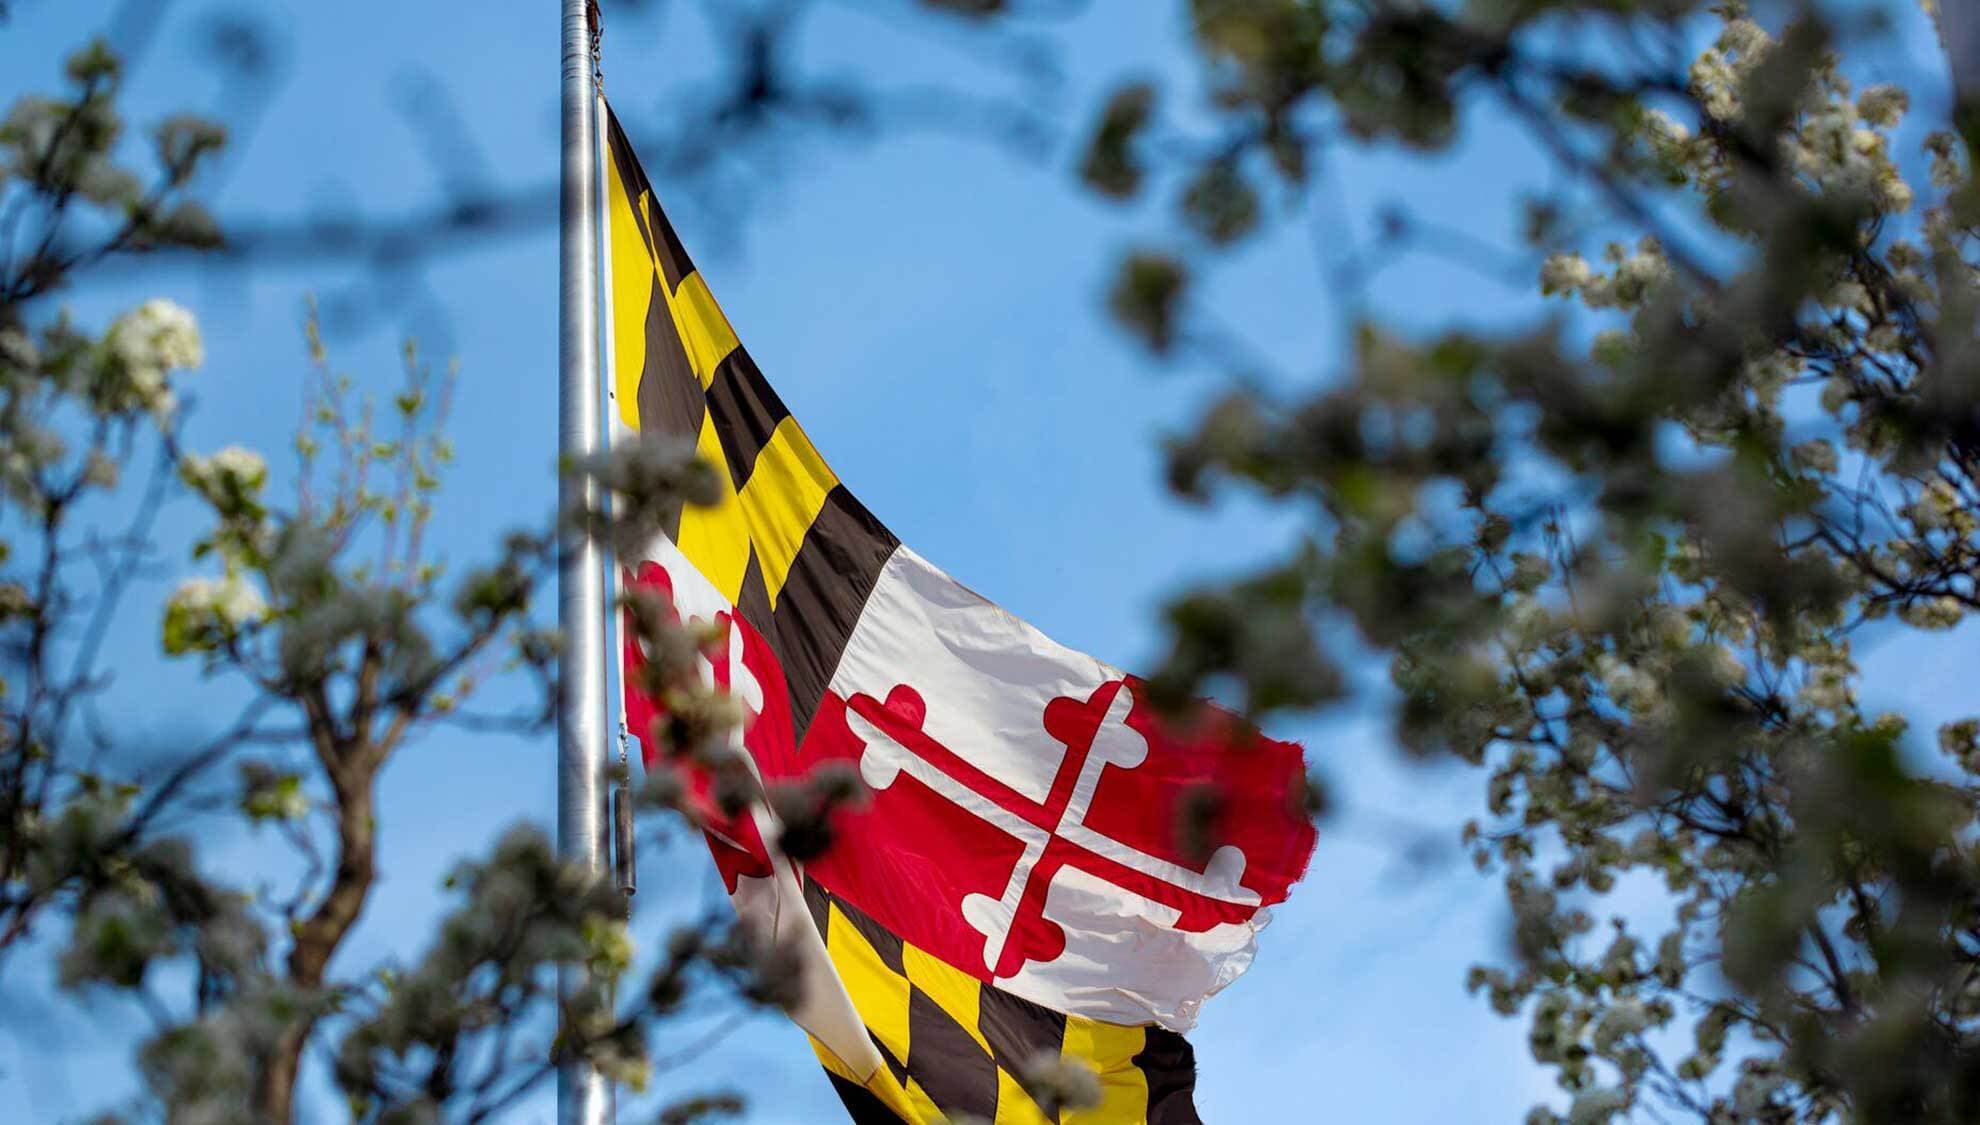 The Maryland State flag among the trees